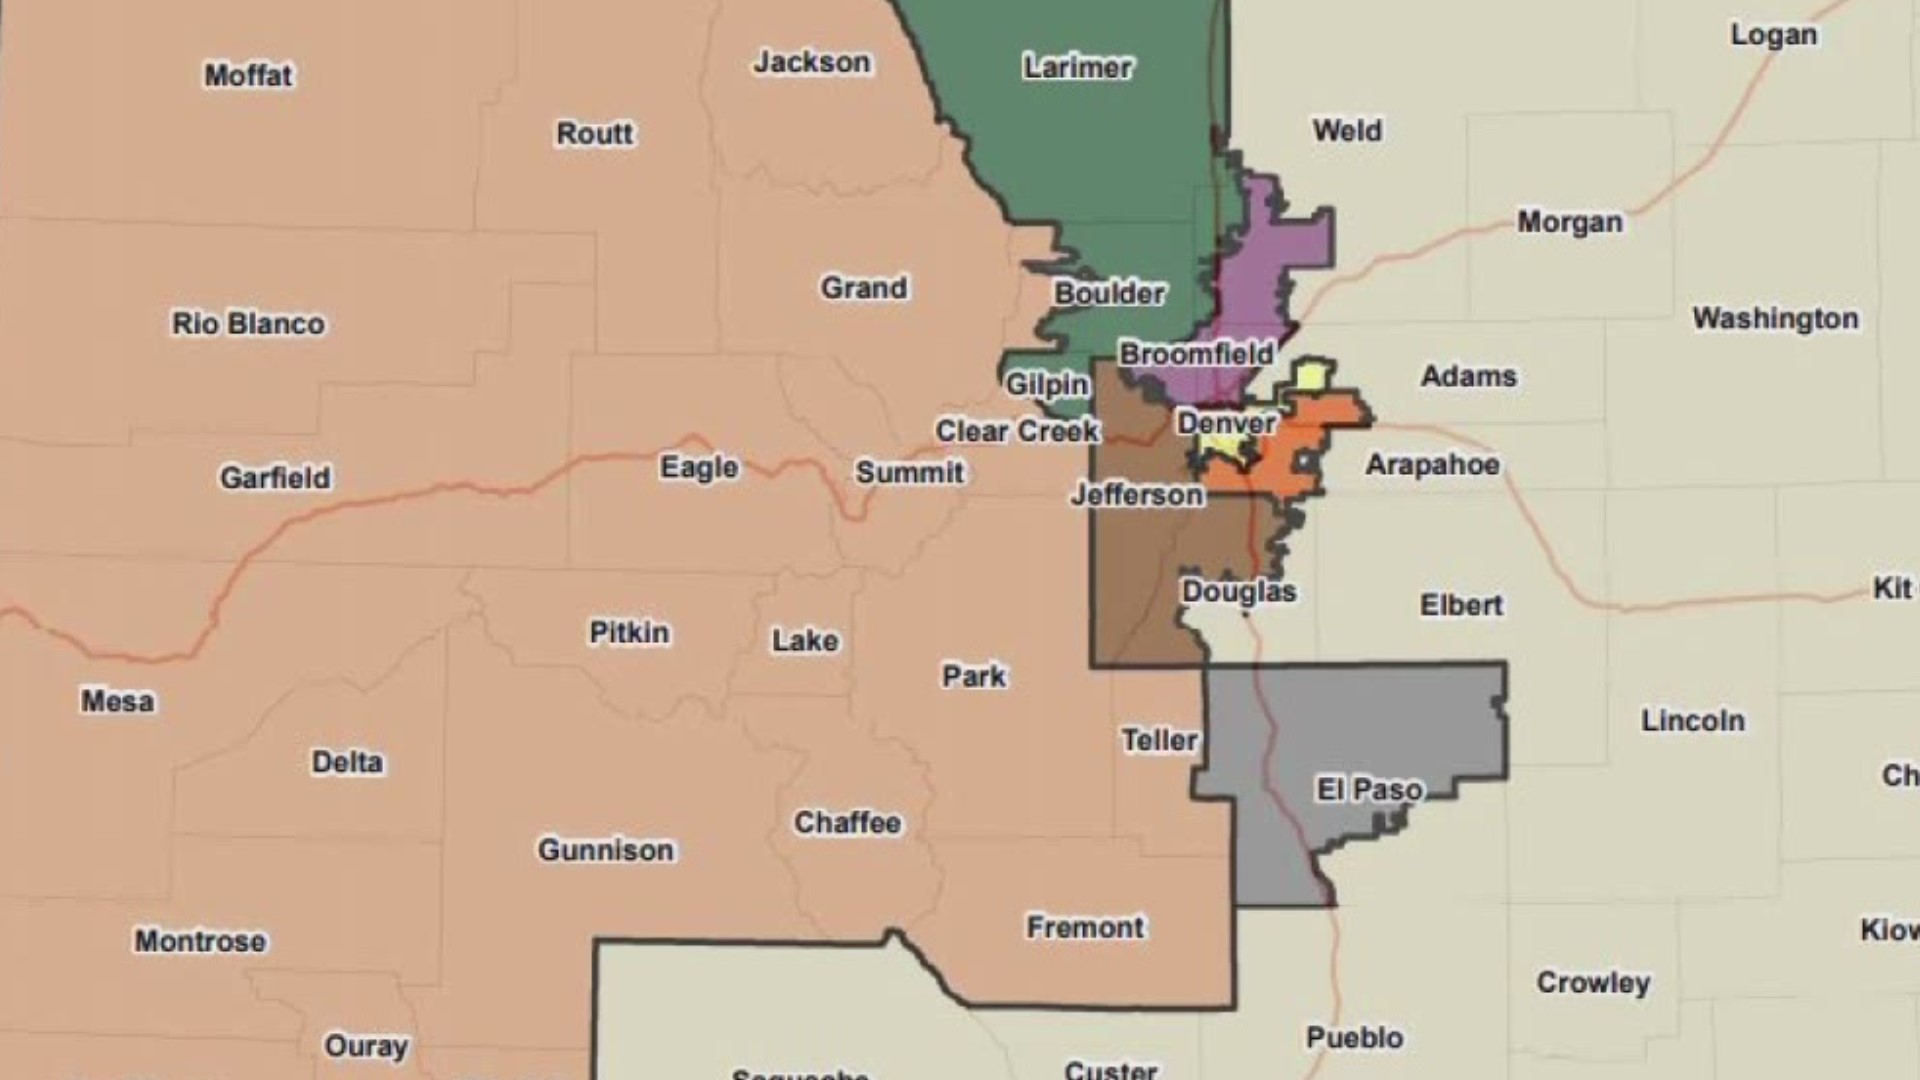 The preliminary map for eight Congressional districts in Colorado is good news for Republicans, who are at a low point for political power since World War II.